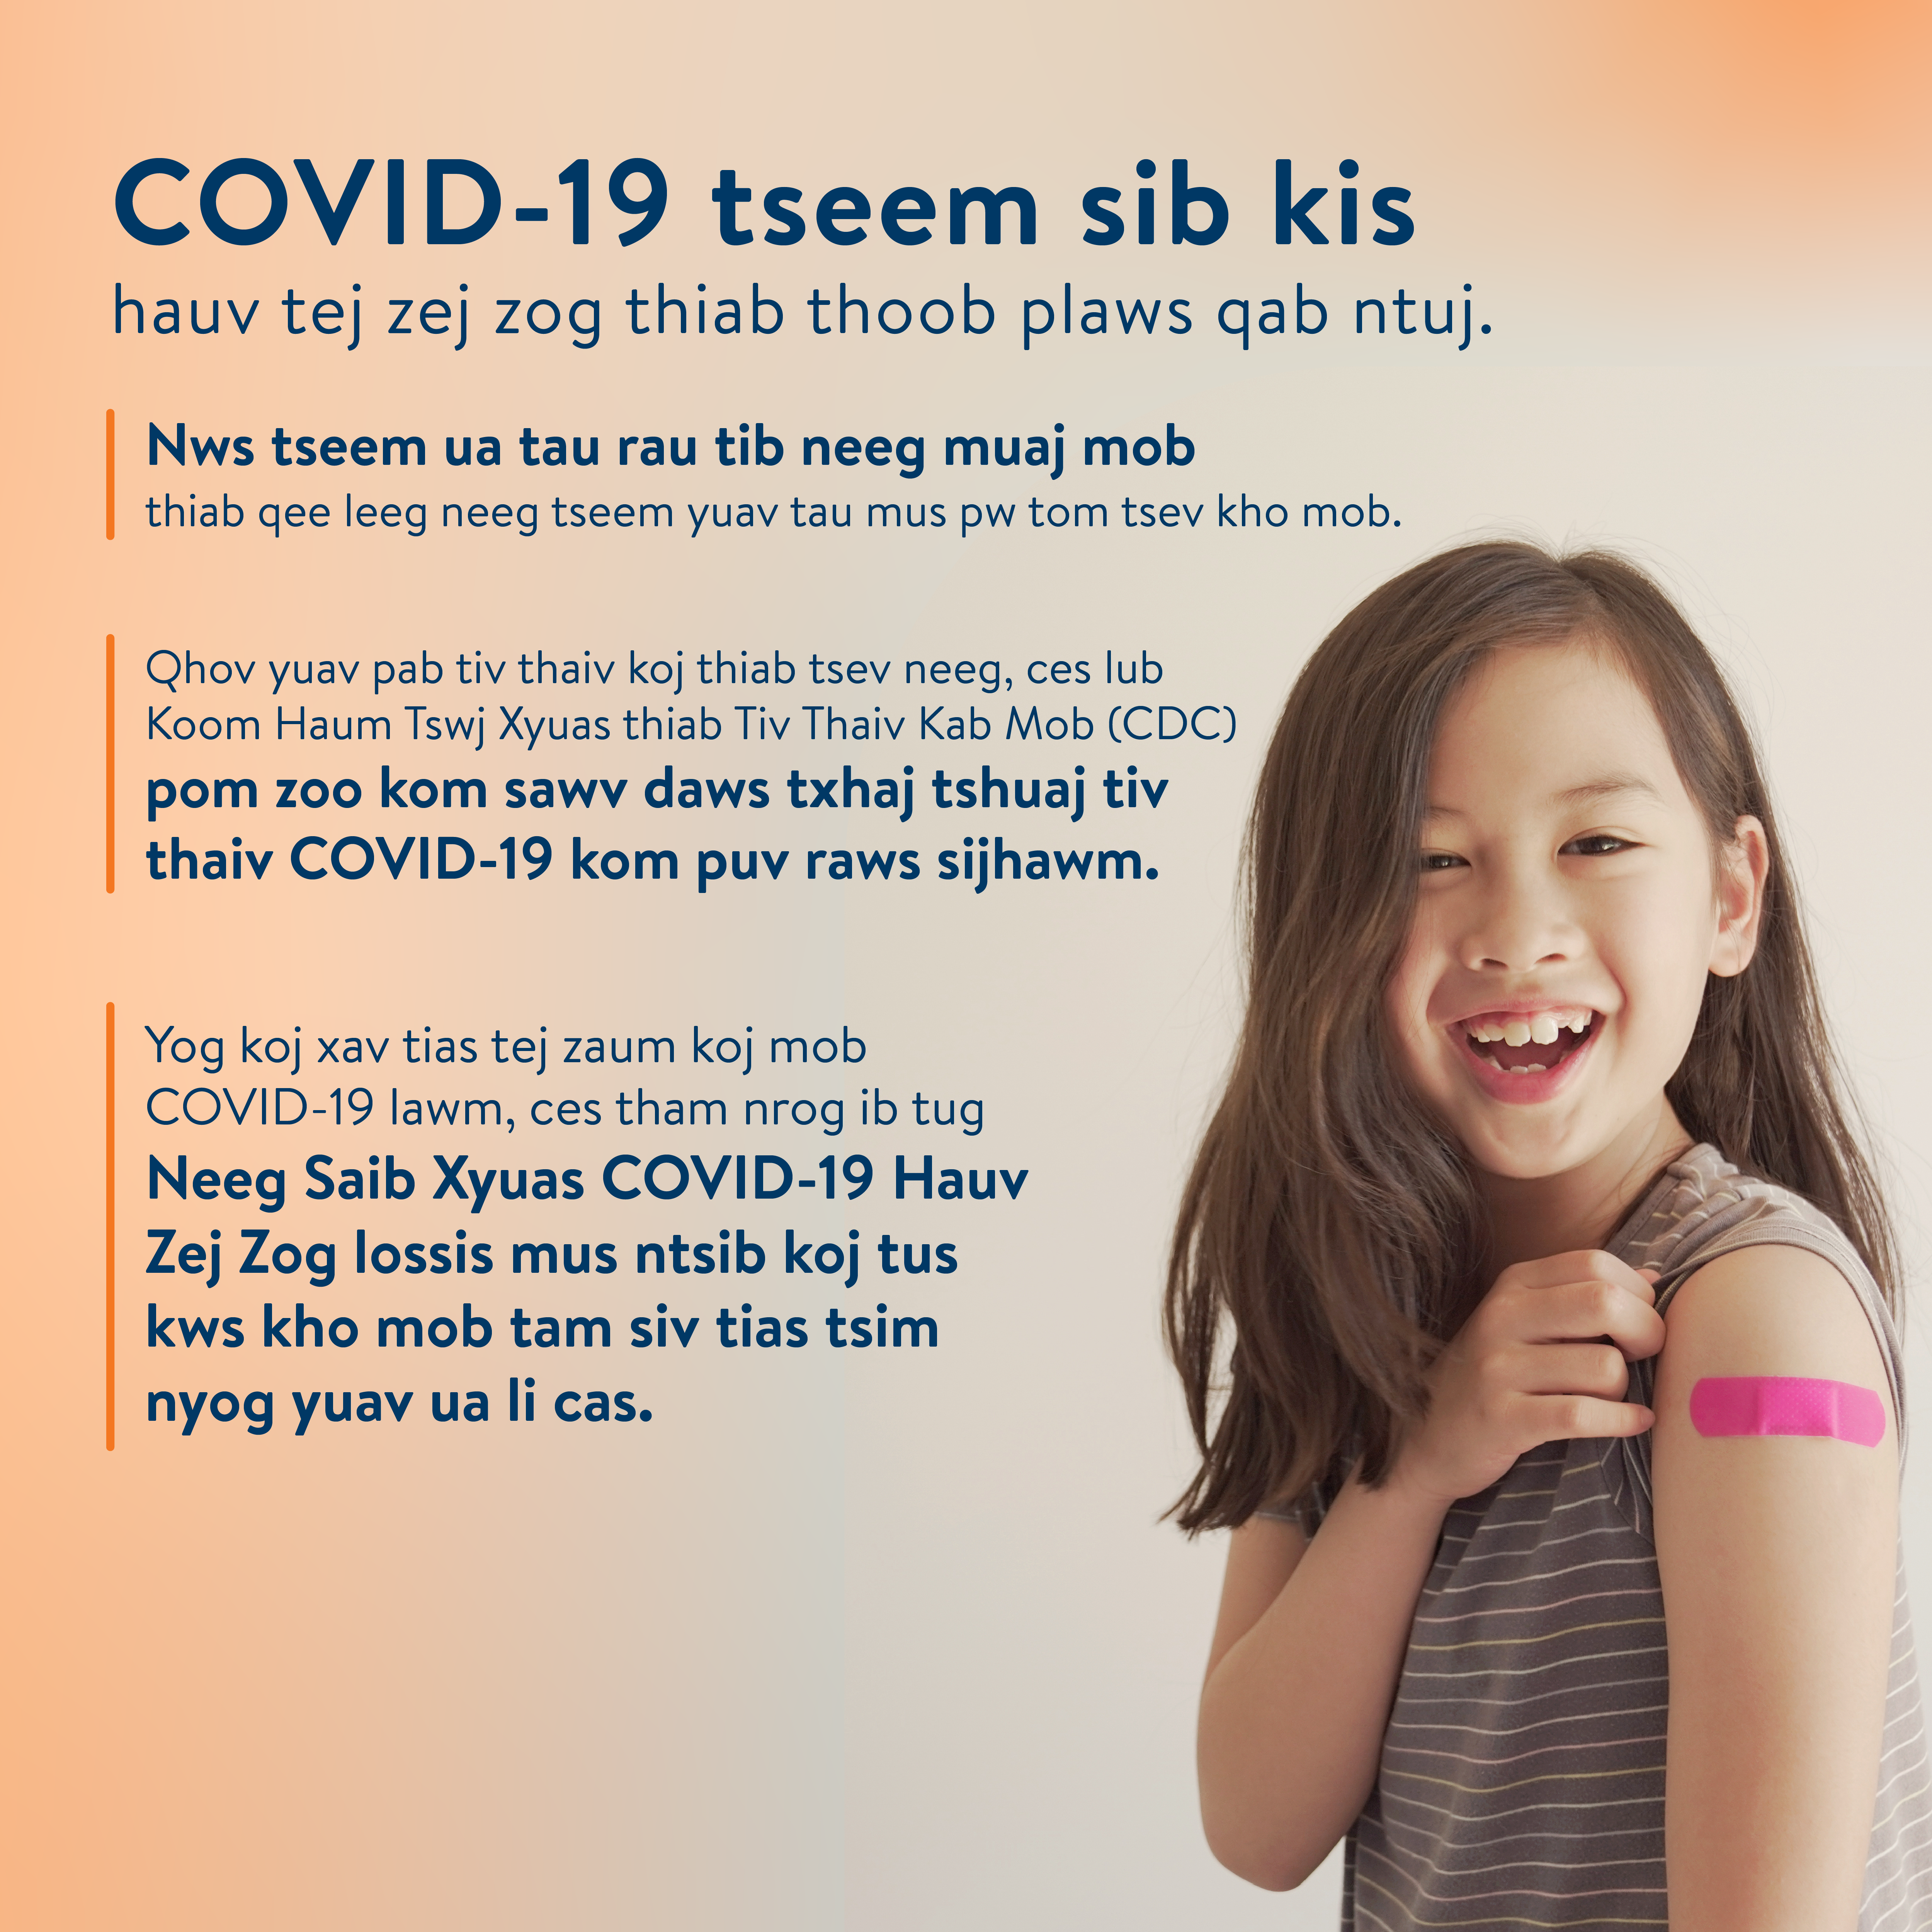 COVID-19 is still spreading in Hmong with image of girl, image for social media